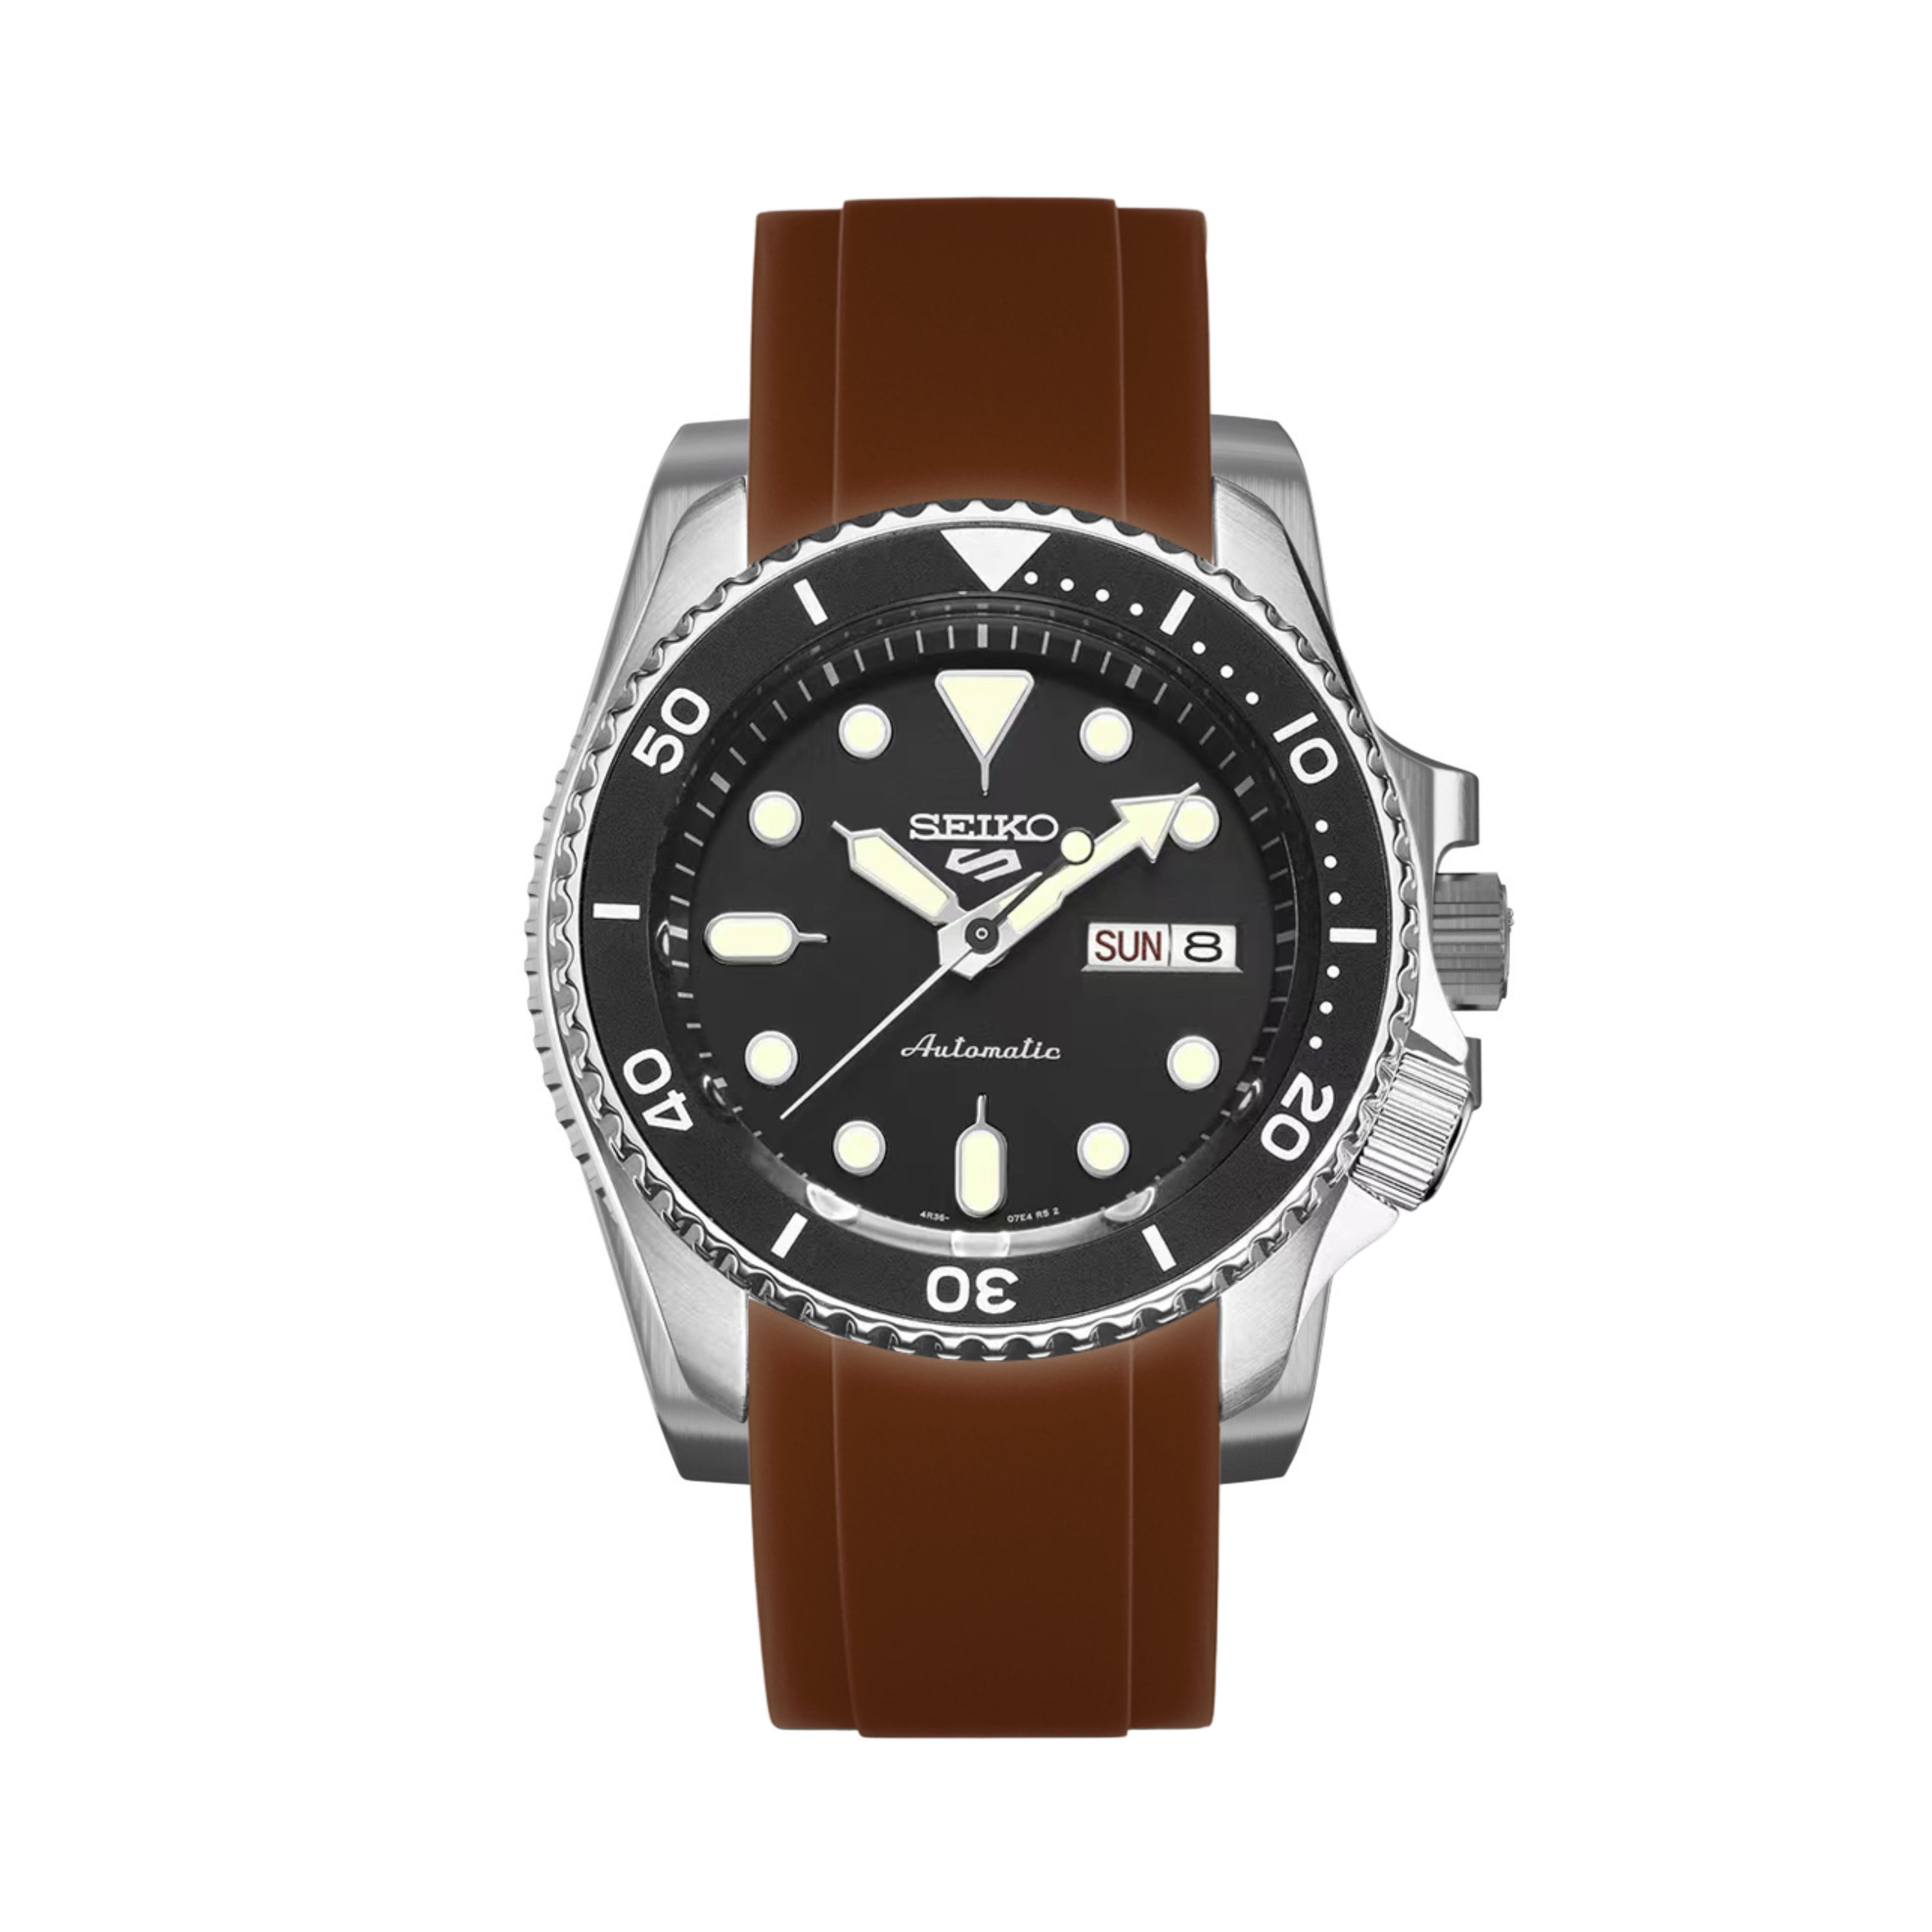 Curved End Soft Silicone Strap - Compatible with Rolex Submariner - Brown (2418)